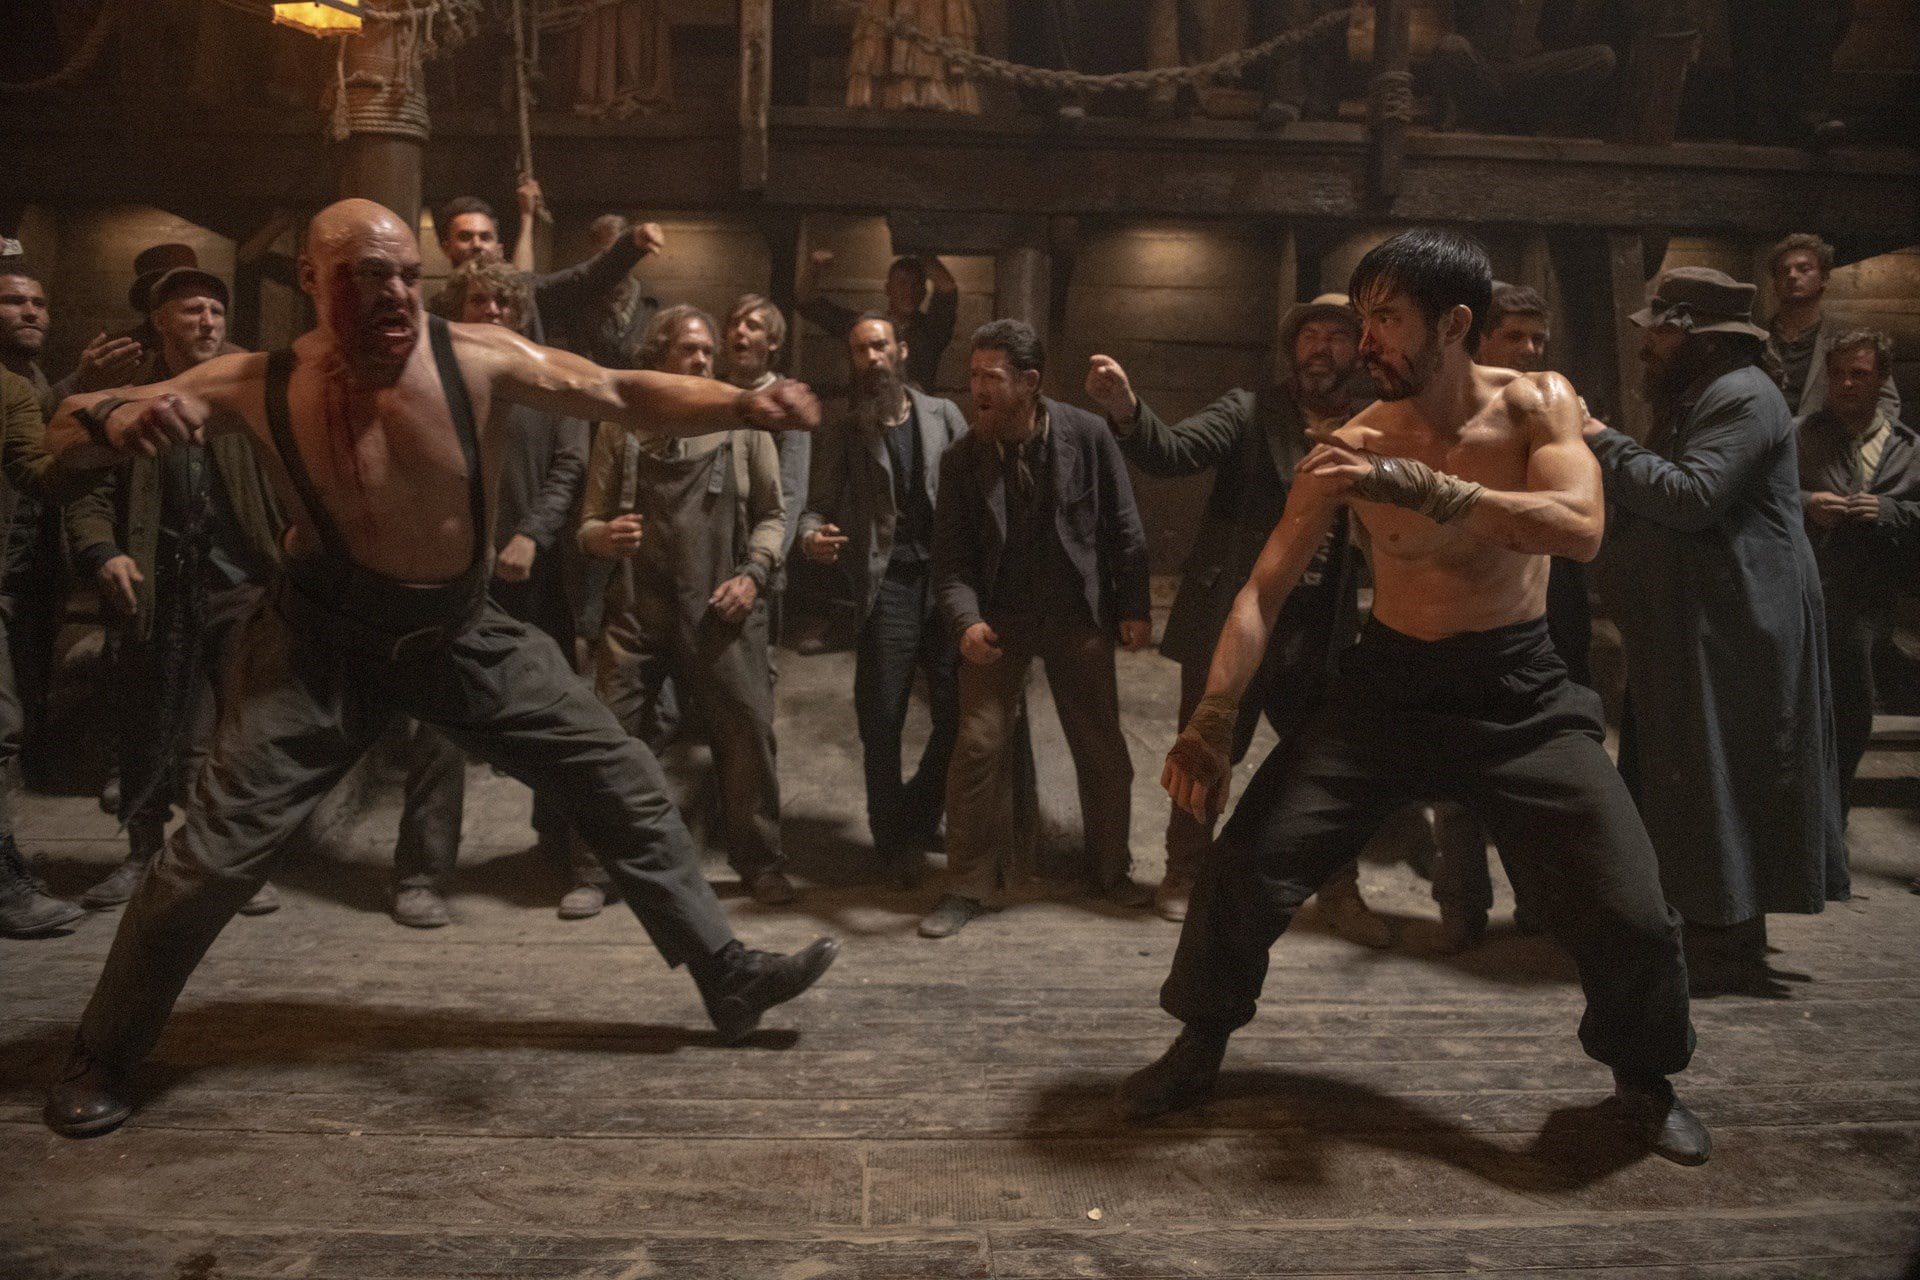 Warrior': How Bruce Lee's Fighting Style Inspired the New Cinemax